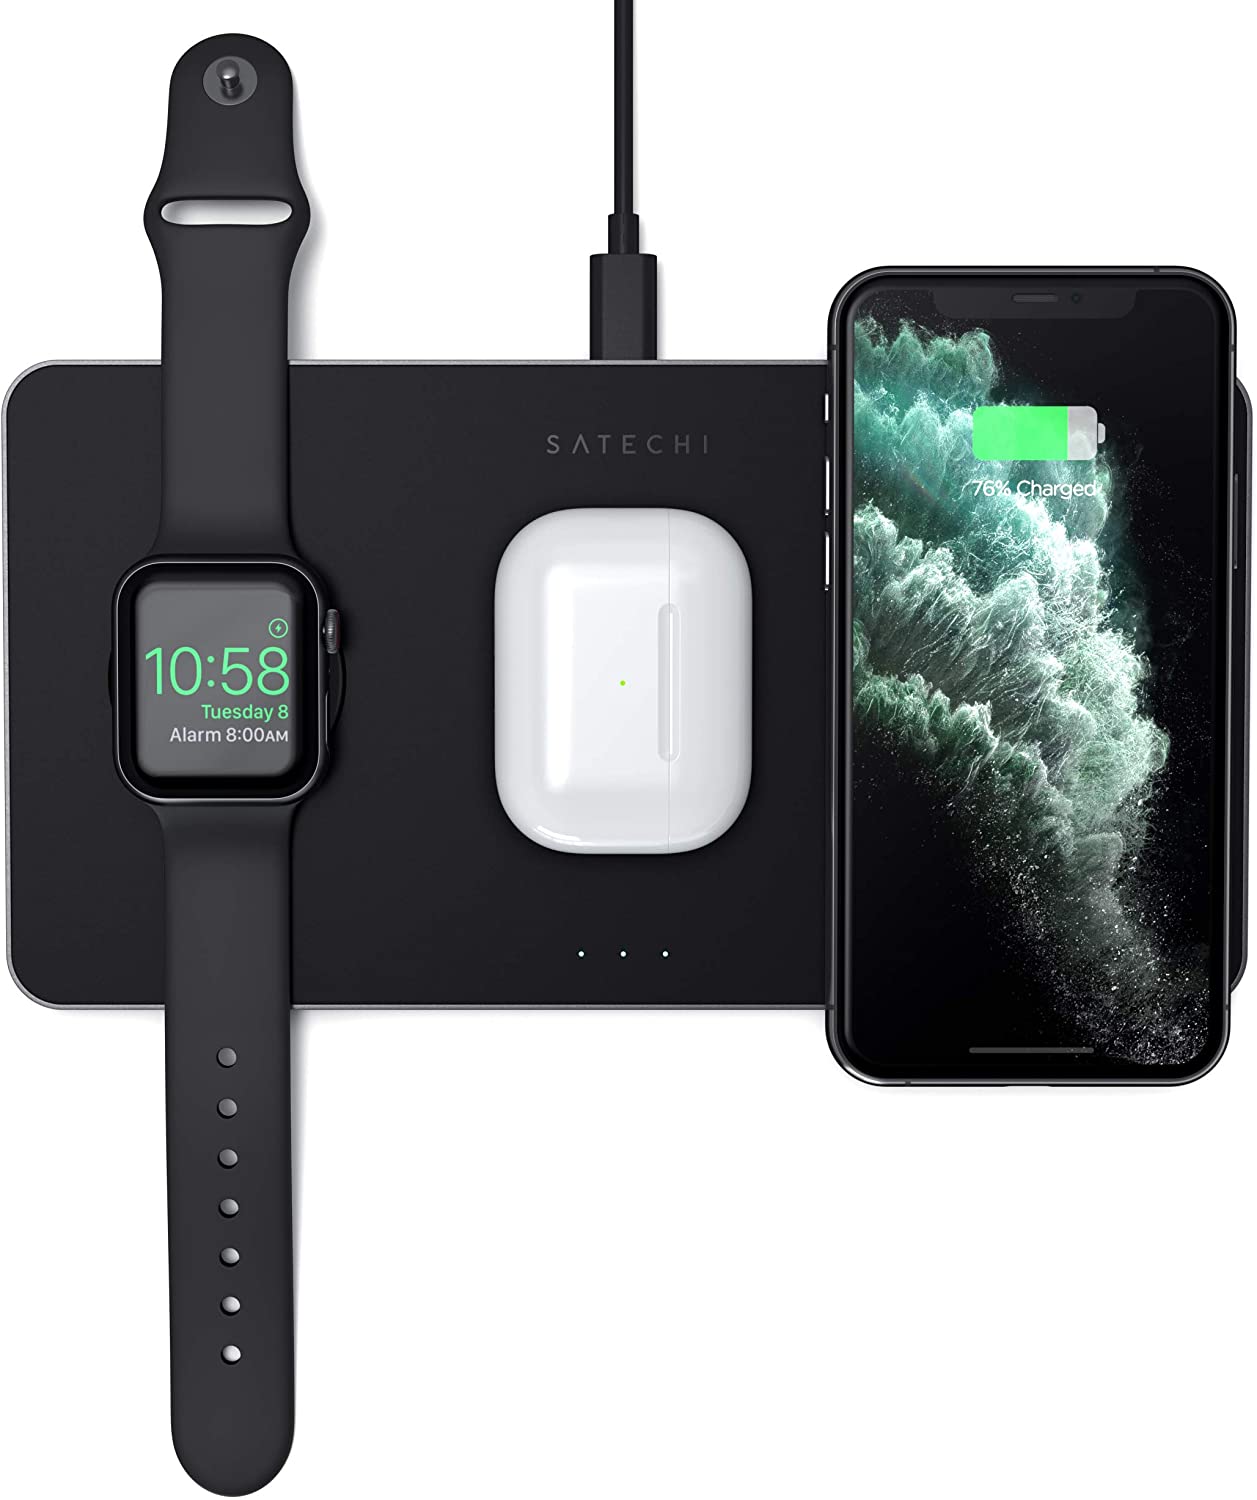 Satechi、Apple WatchとiPhoneとAirPodsを同時充電可能なワイヤレス充電パッドを販売開始